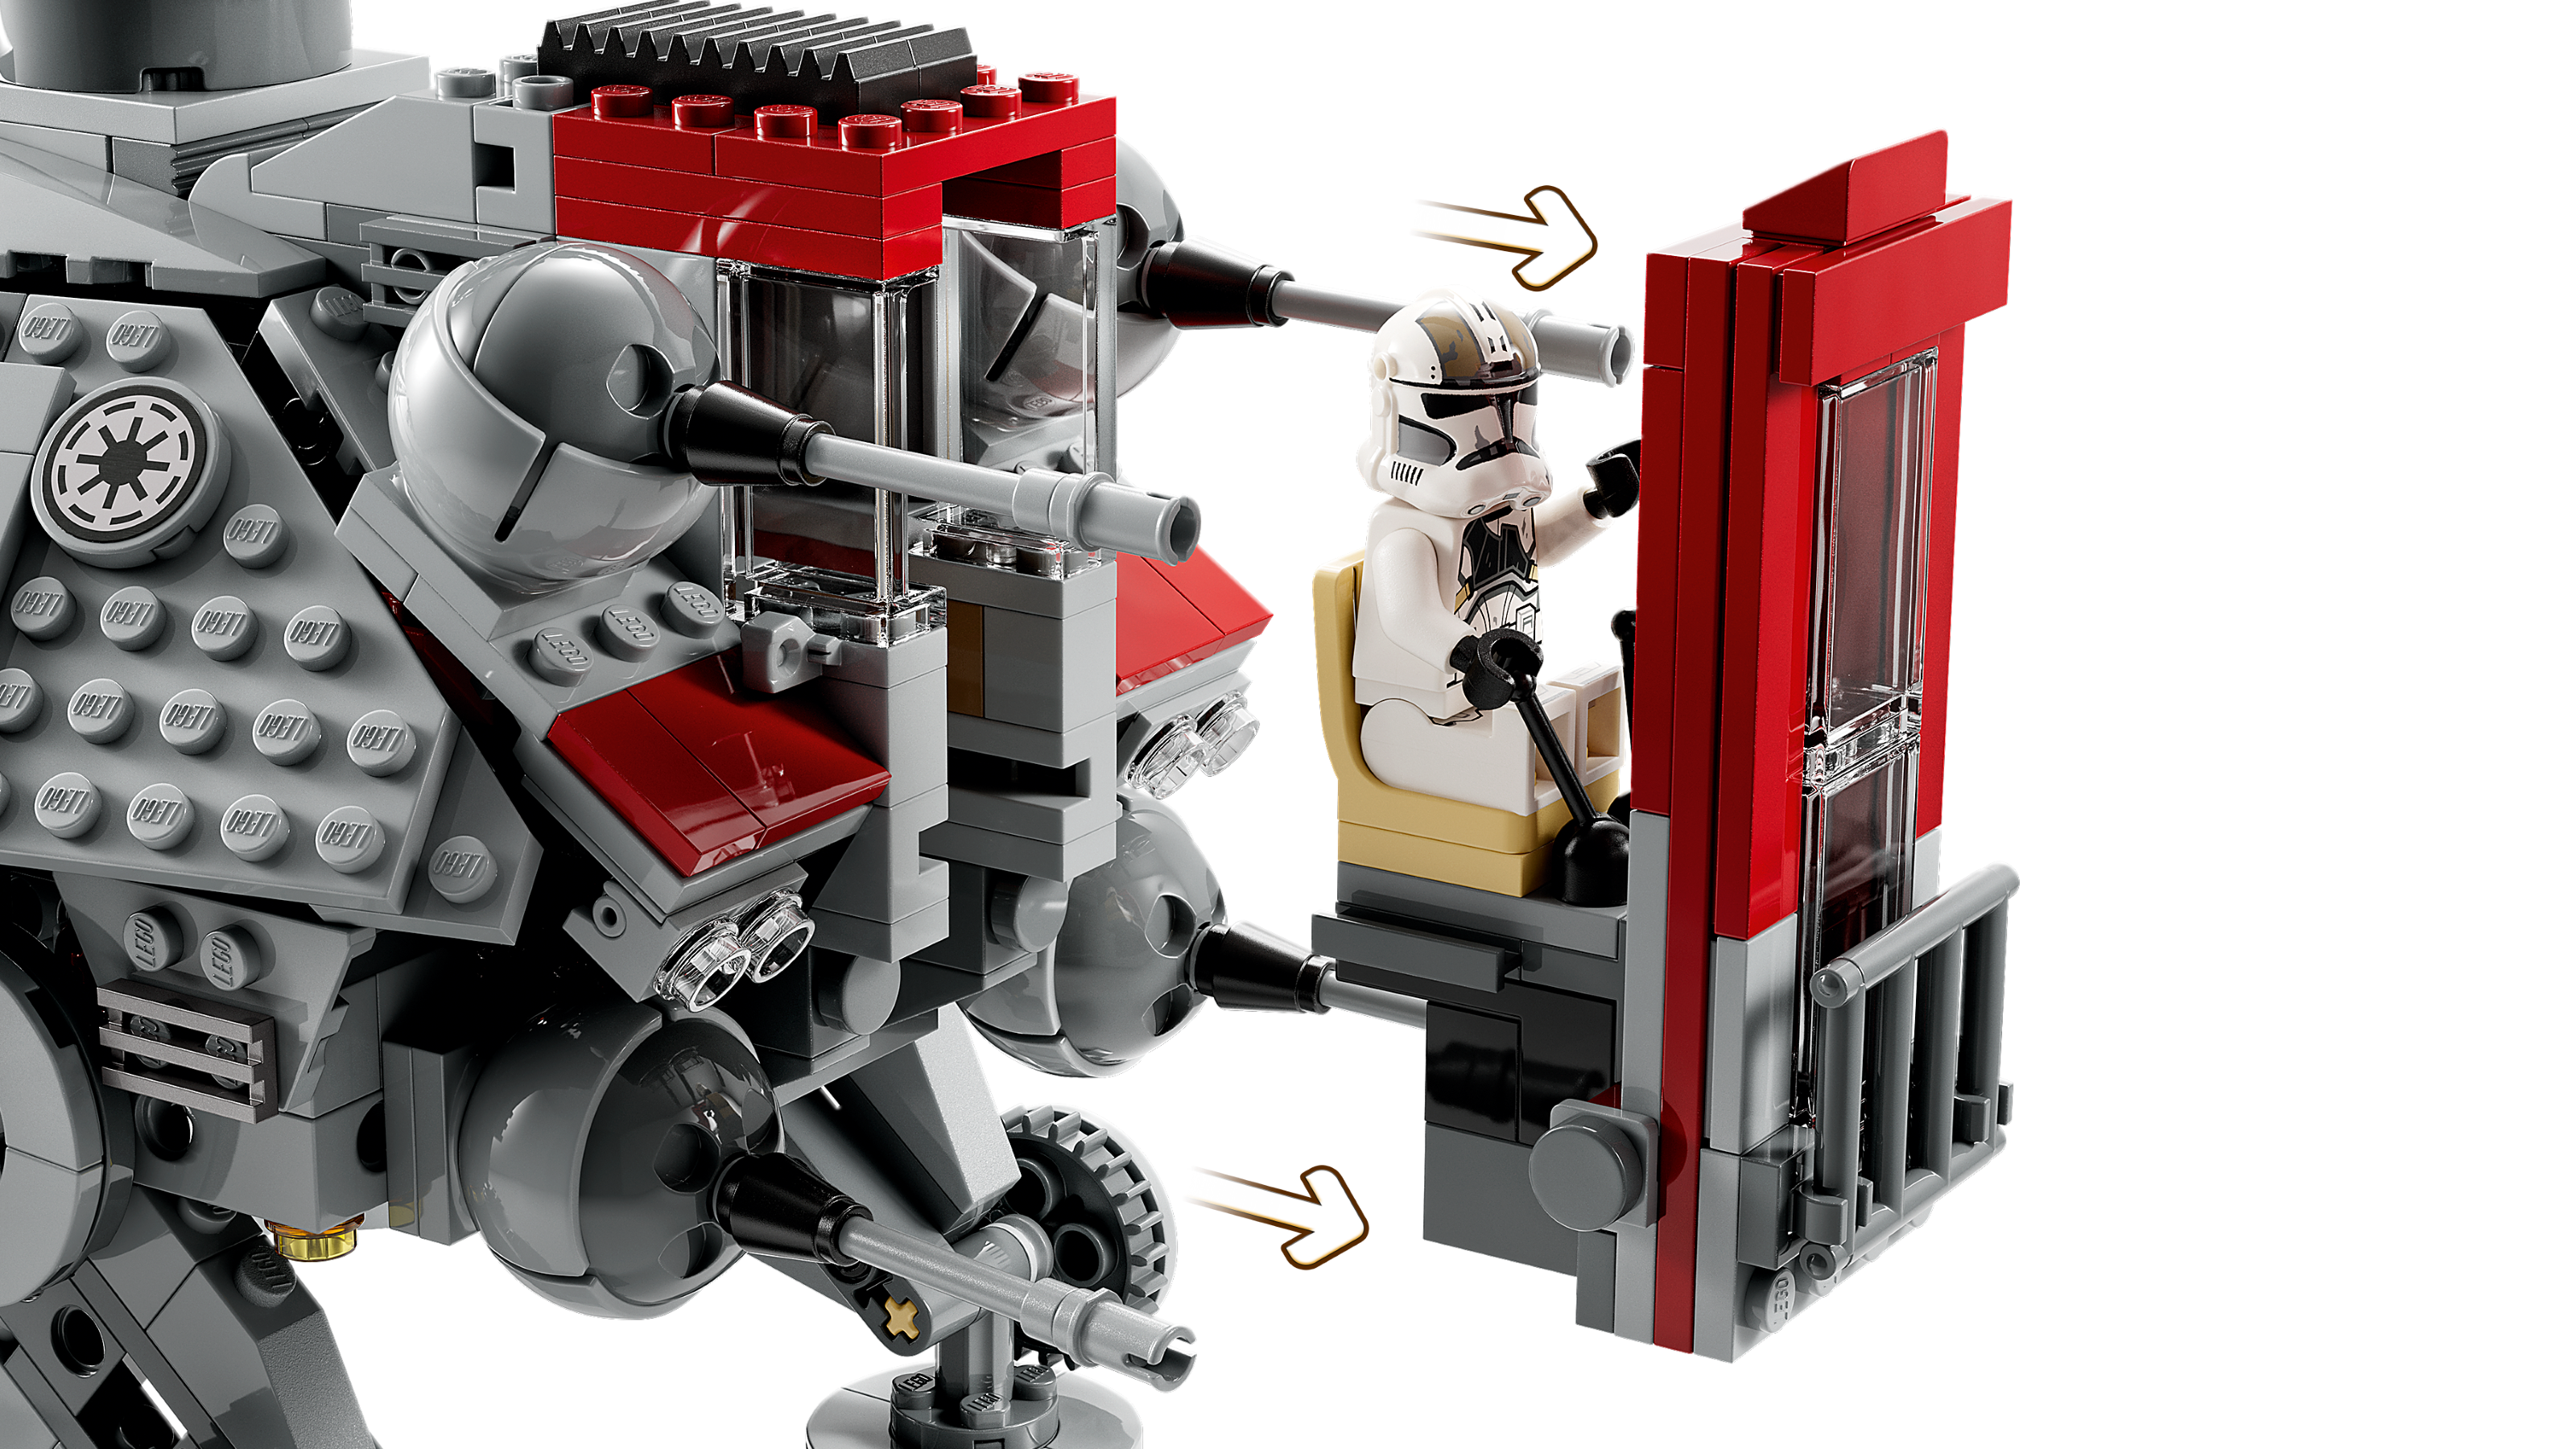 AT-TE™ Walker 75337 | Star Wars™ | Buy online at the Official LEGO 